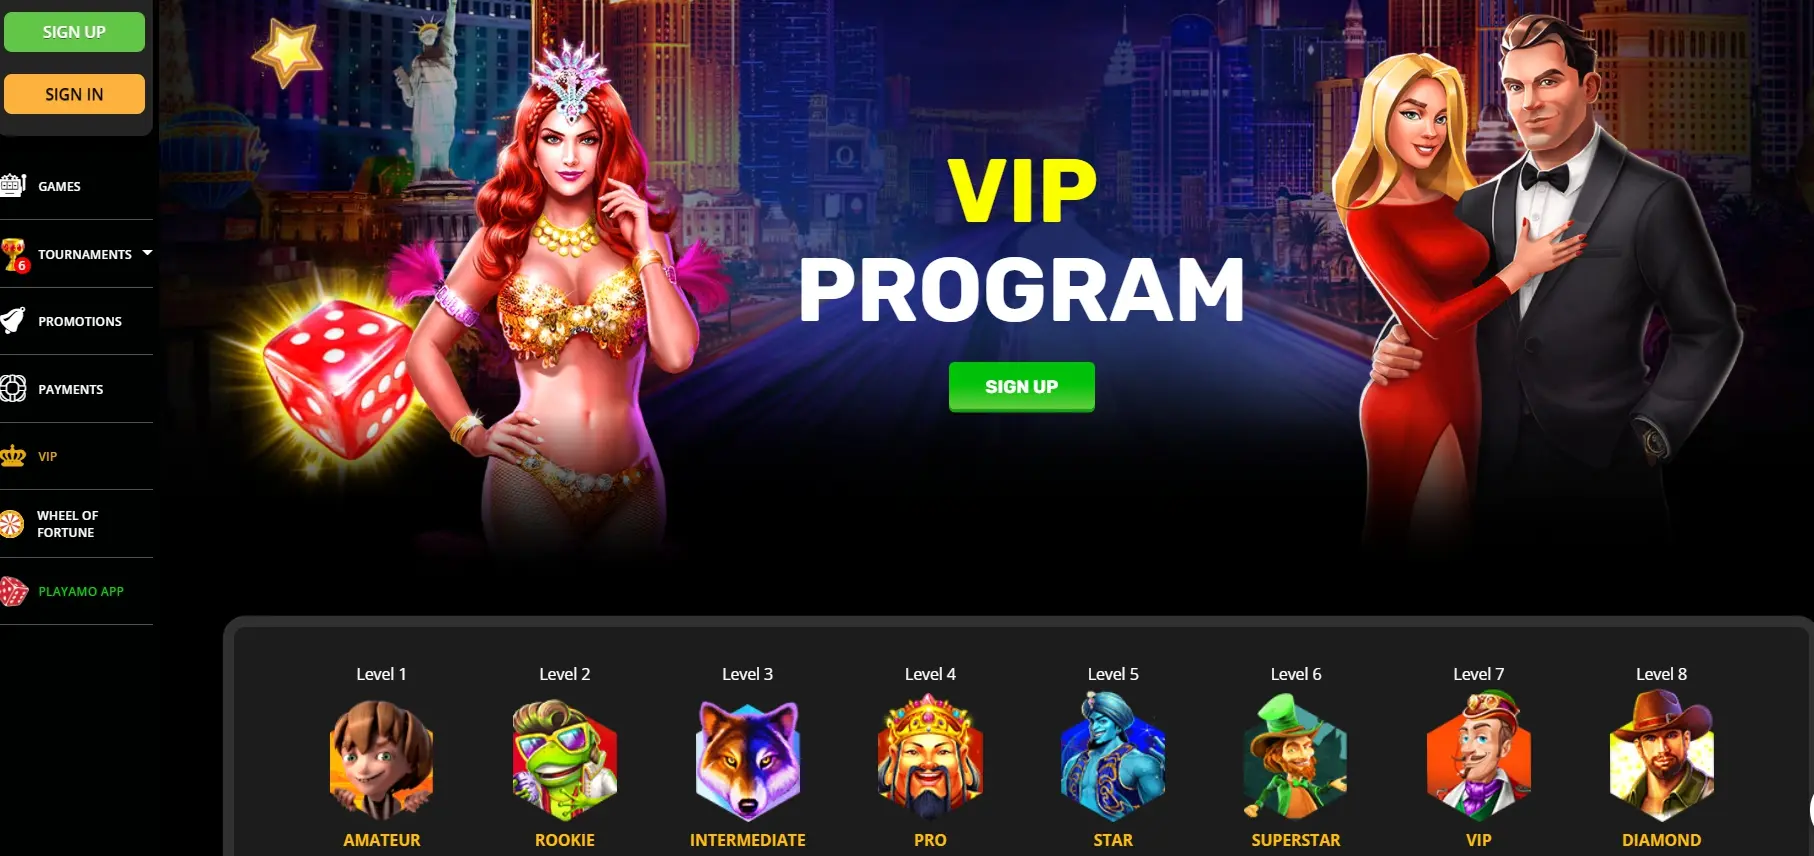 Promotions for VIP Users and Customer Service